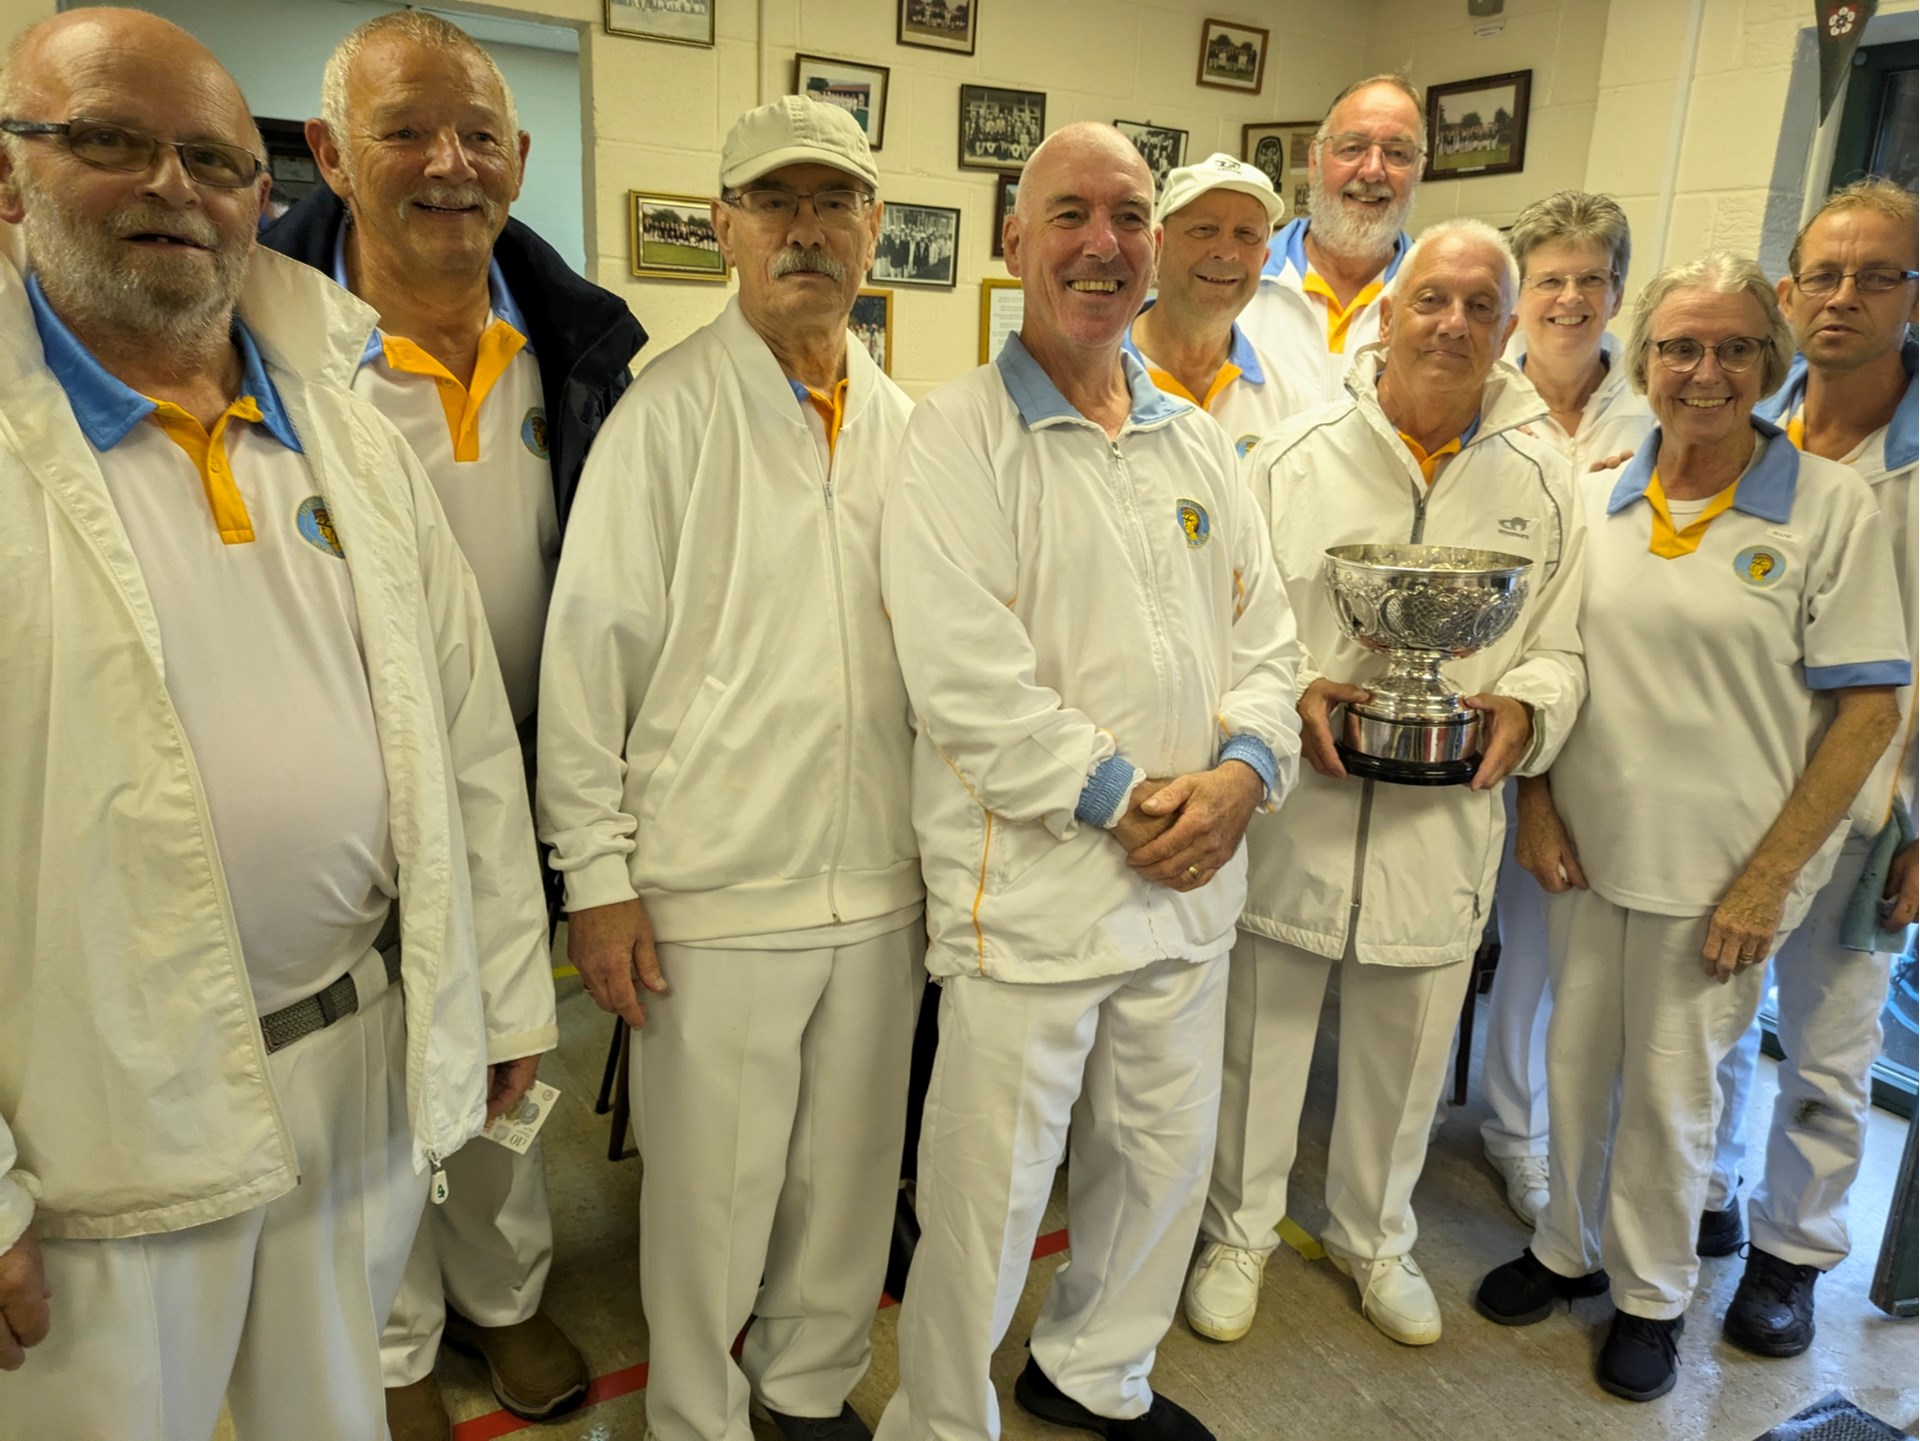 Brambley Bowl Winners 2024, winning 3 rinks to 1 against a strong Evington side on 15th July at South Wigston in the rain... Well done Thurmaston Bowls Club